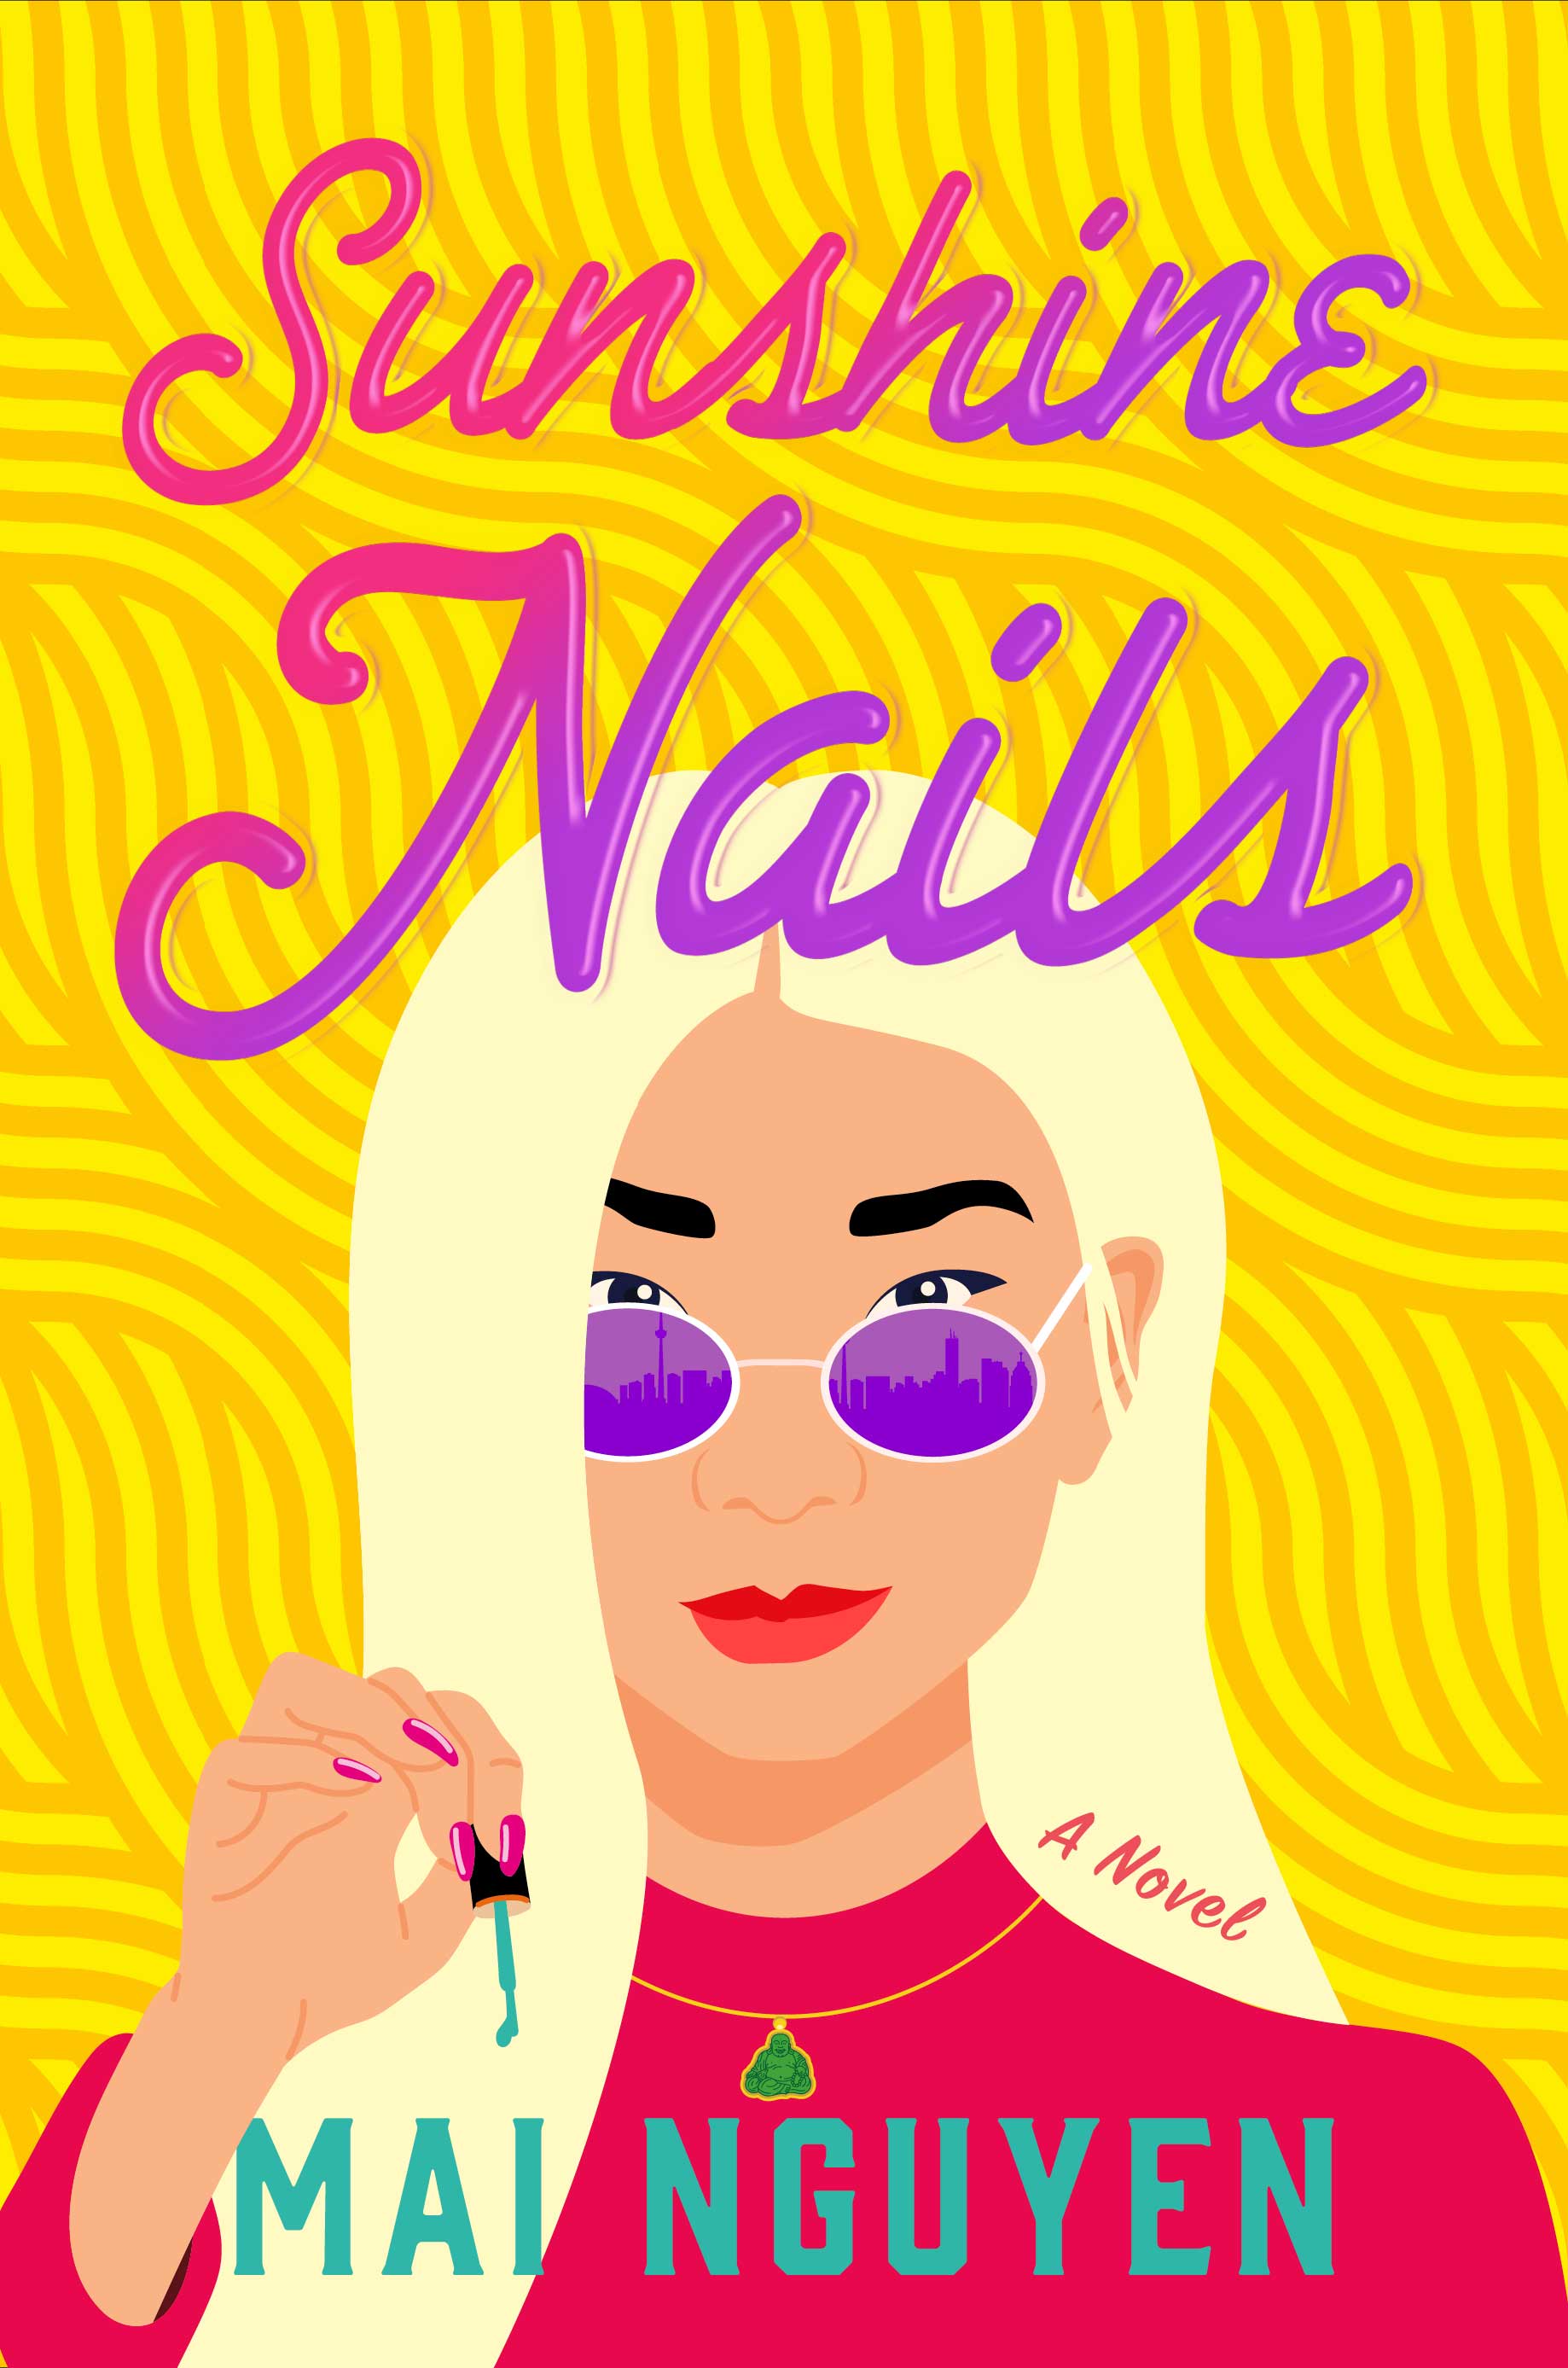 Book cover of Sunshine Nails. An illustration of a woman with long blonde hair holding up a nail polish brush, peering over her sunglasses that reflect the skyline of Toronto on a yellow-patterned background..